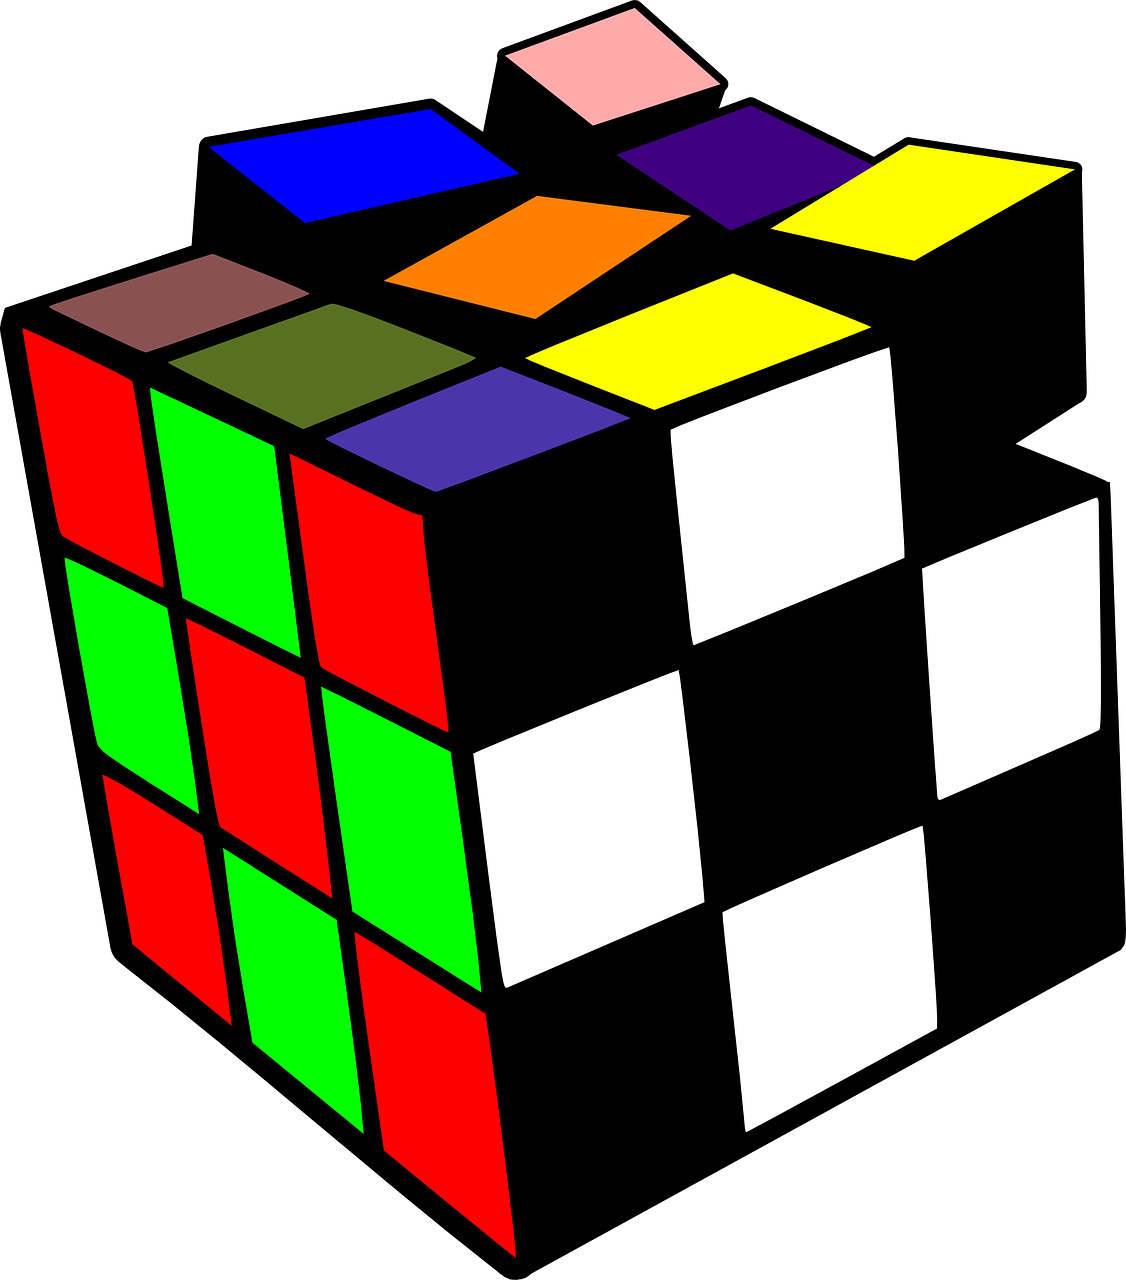 a colorful rubik cube on a black background, a raytraced image, inspired by Ernő Rubik, cubo-futurism, !!! very coherent!!! vector art, amoled wallpaper, 2 0 0 0's photo, cartoonish and simplistic